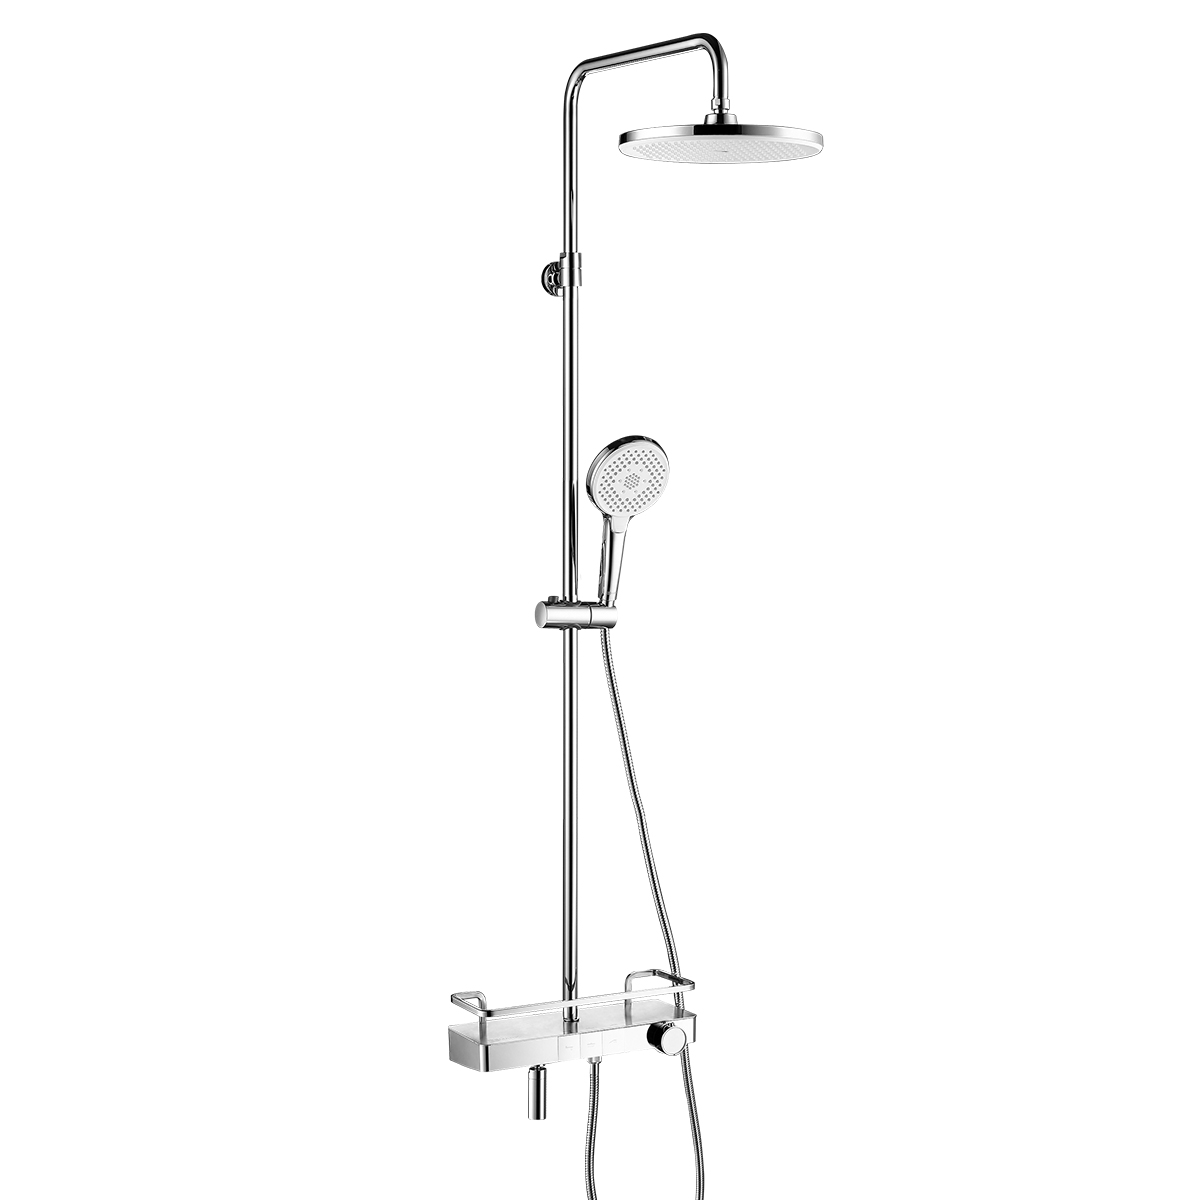 LM7011C Thermostatic bath and shower faucet with adjustable rod height, swivel spout and «Tropical rain» shower head